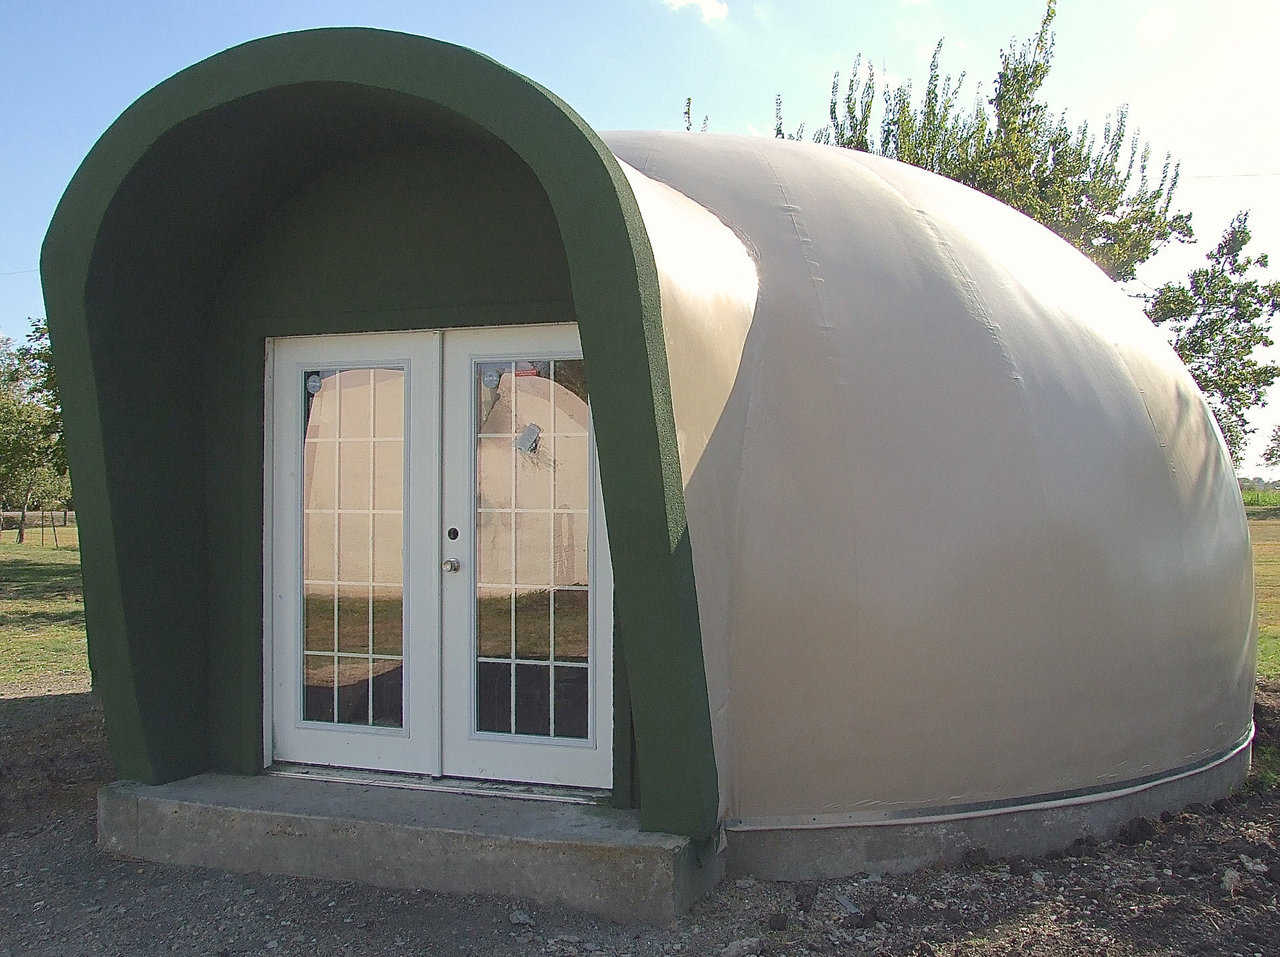 When Mike South built a new, small dome behind his home, he designed and built a tilted-out augment over the front entrance and the windows in back.  The front augment protects the door and provides shelter for folks entering the dome, while the back augment protects the windows.